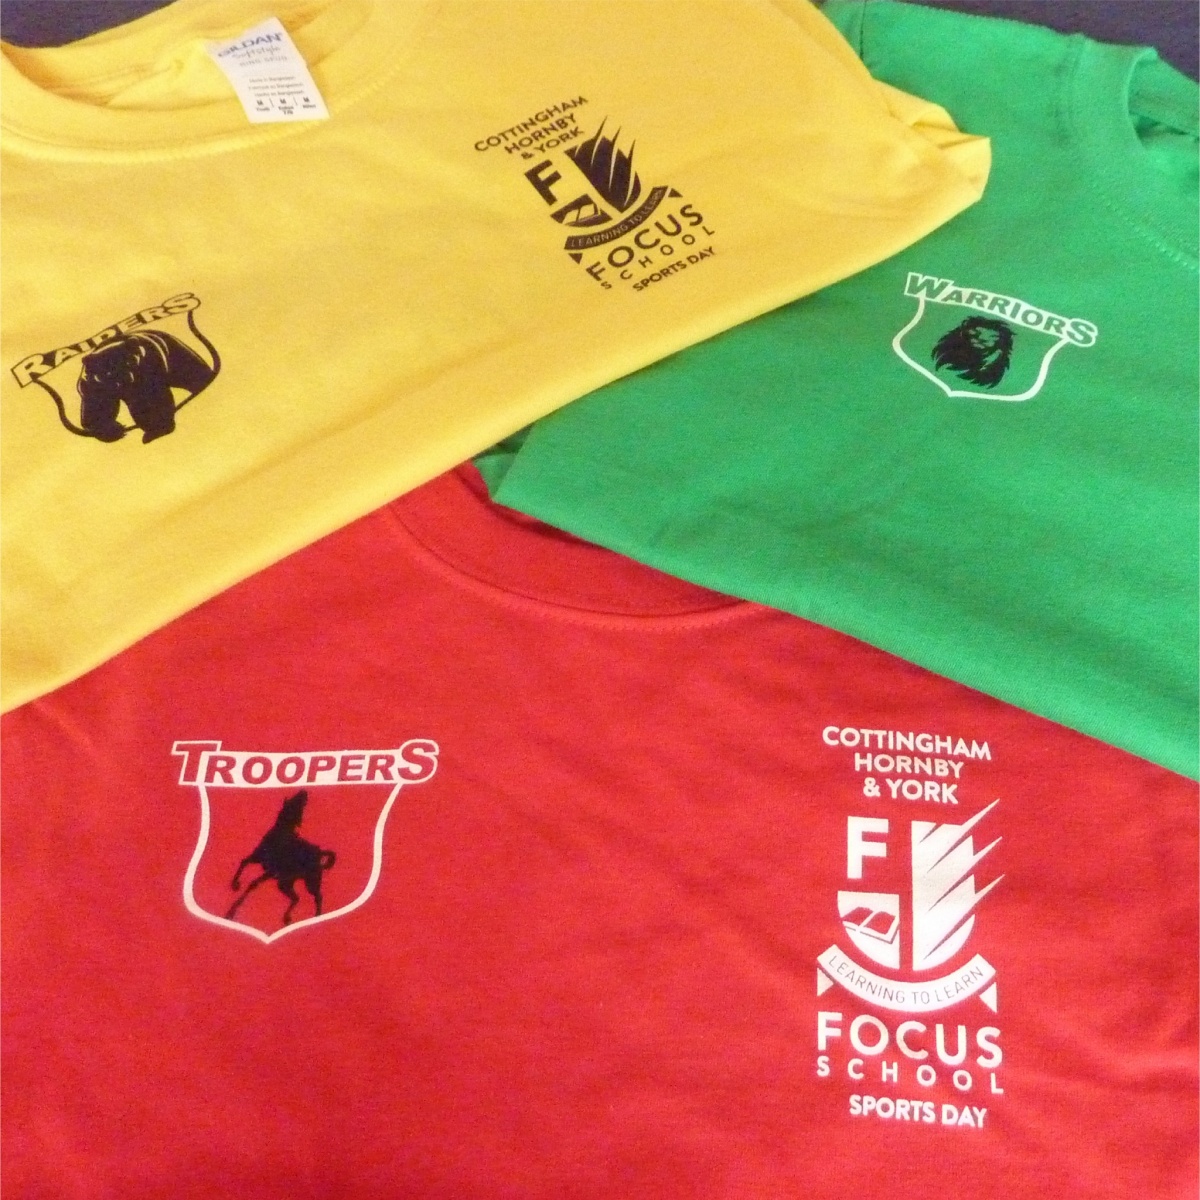 bright coloured t shirts finished with printed logos